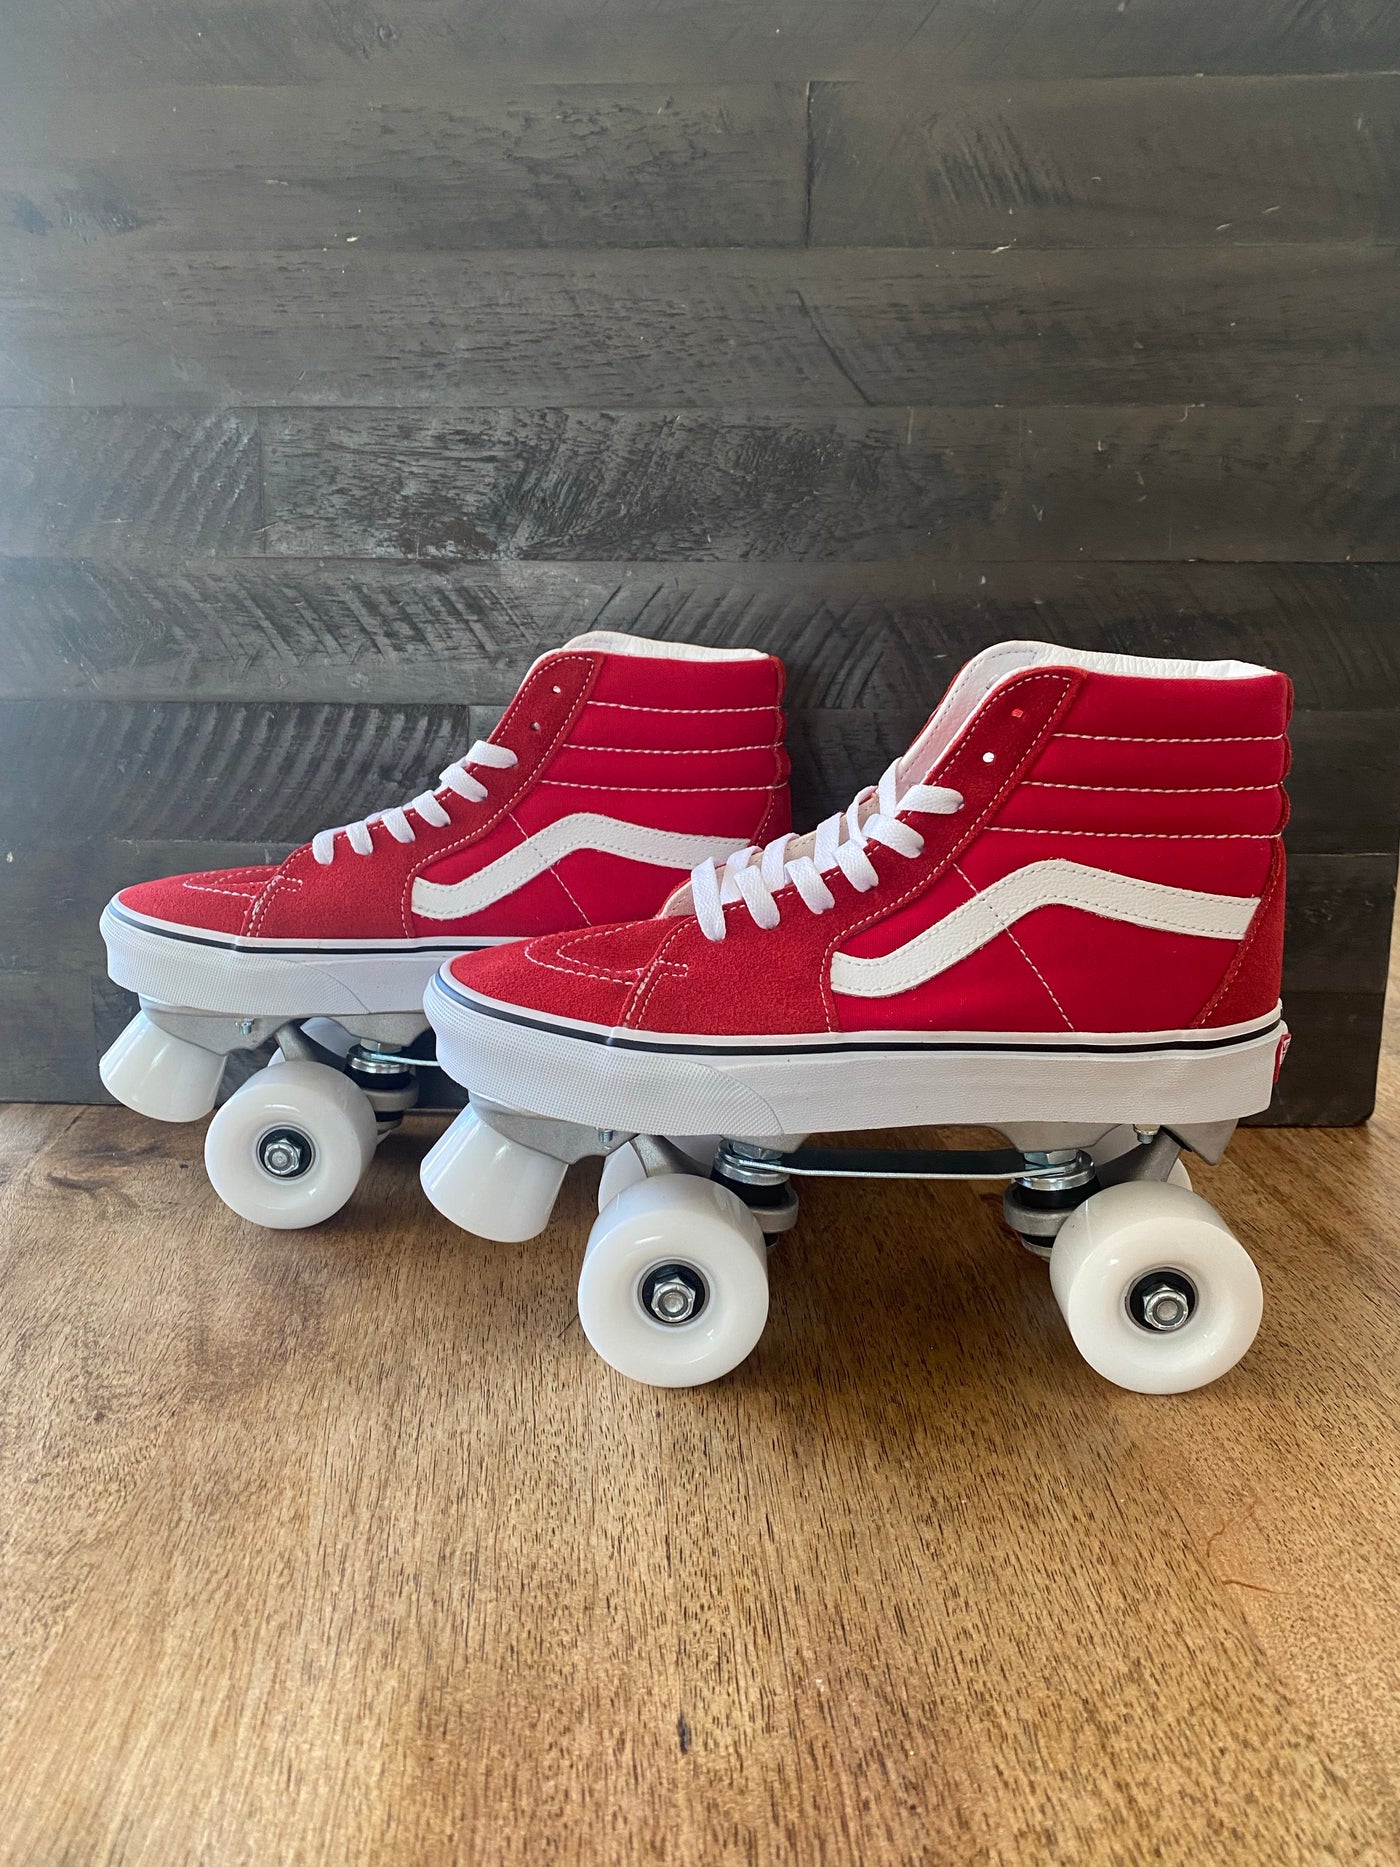 Red Custom Skates - Adults All Sizes